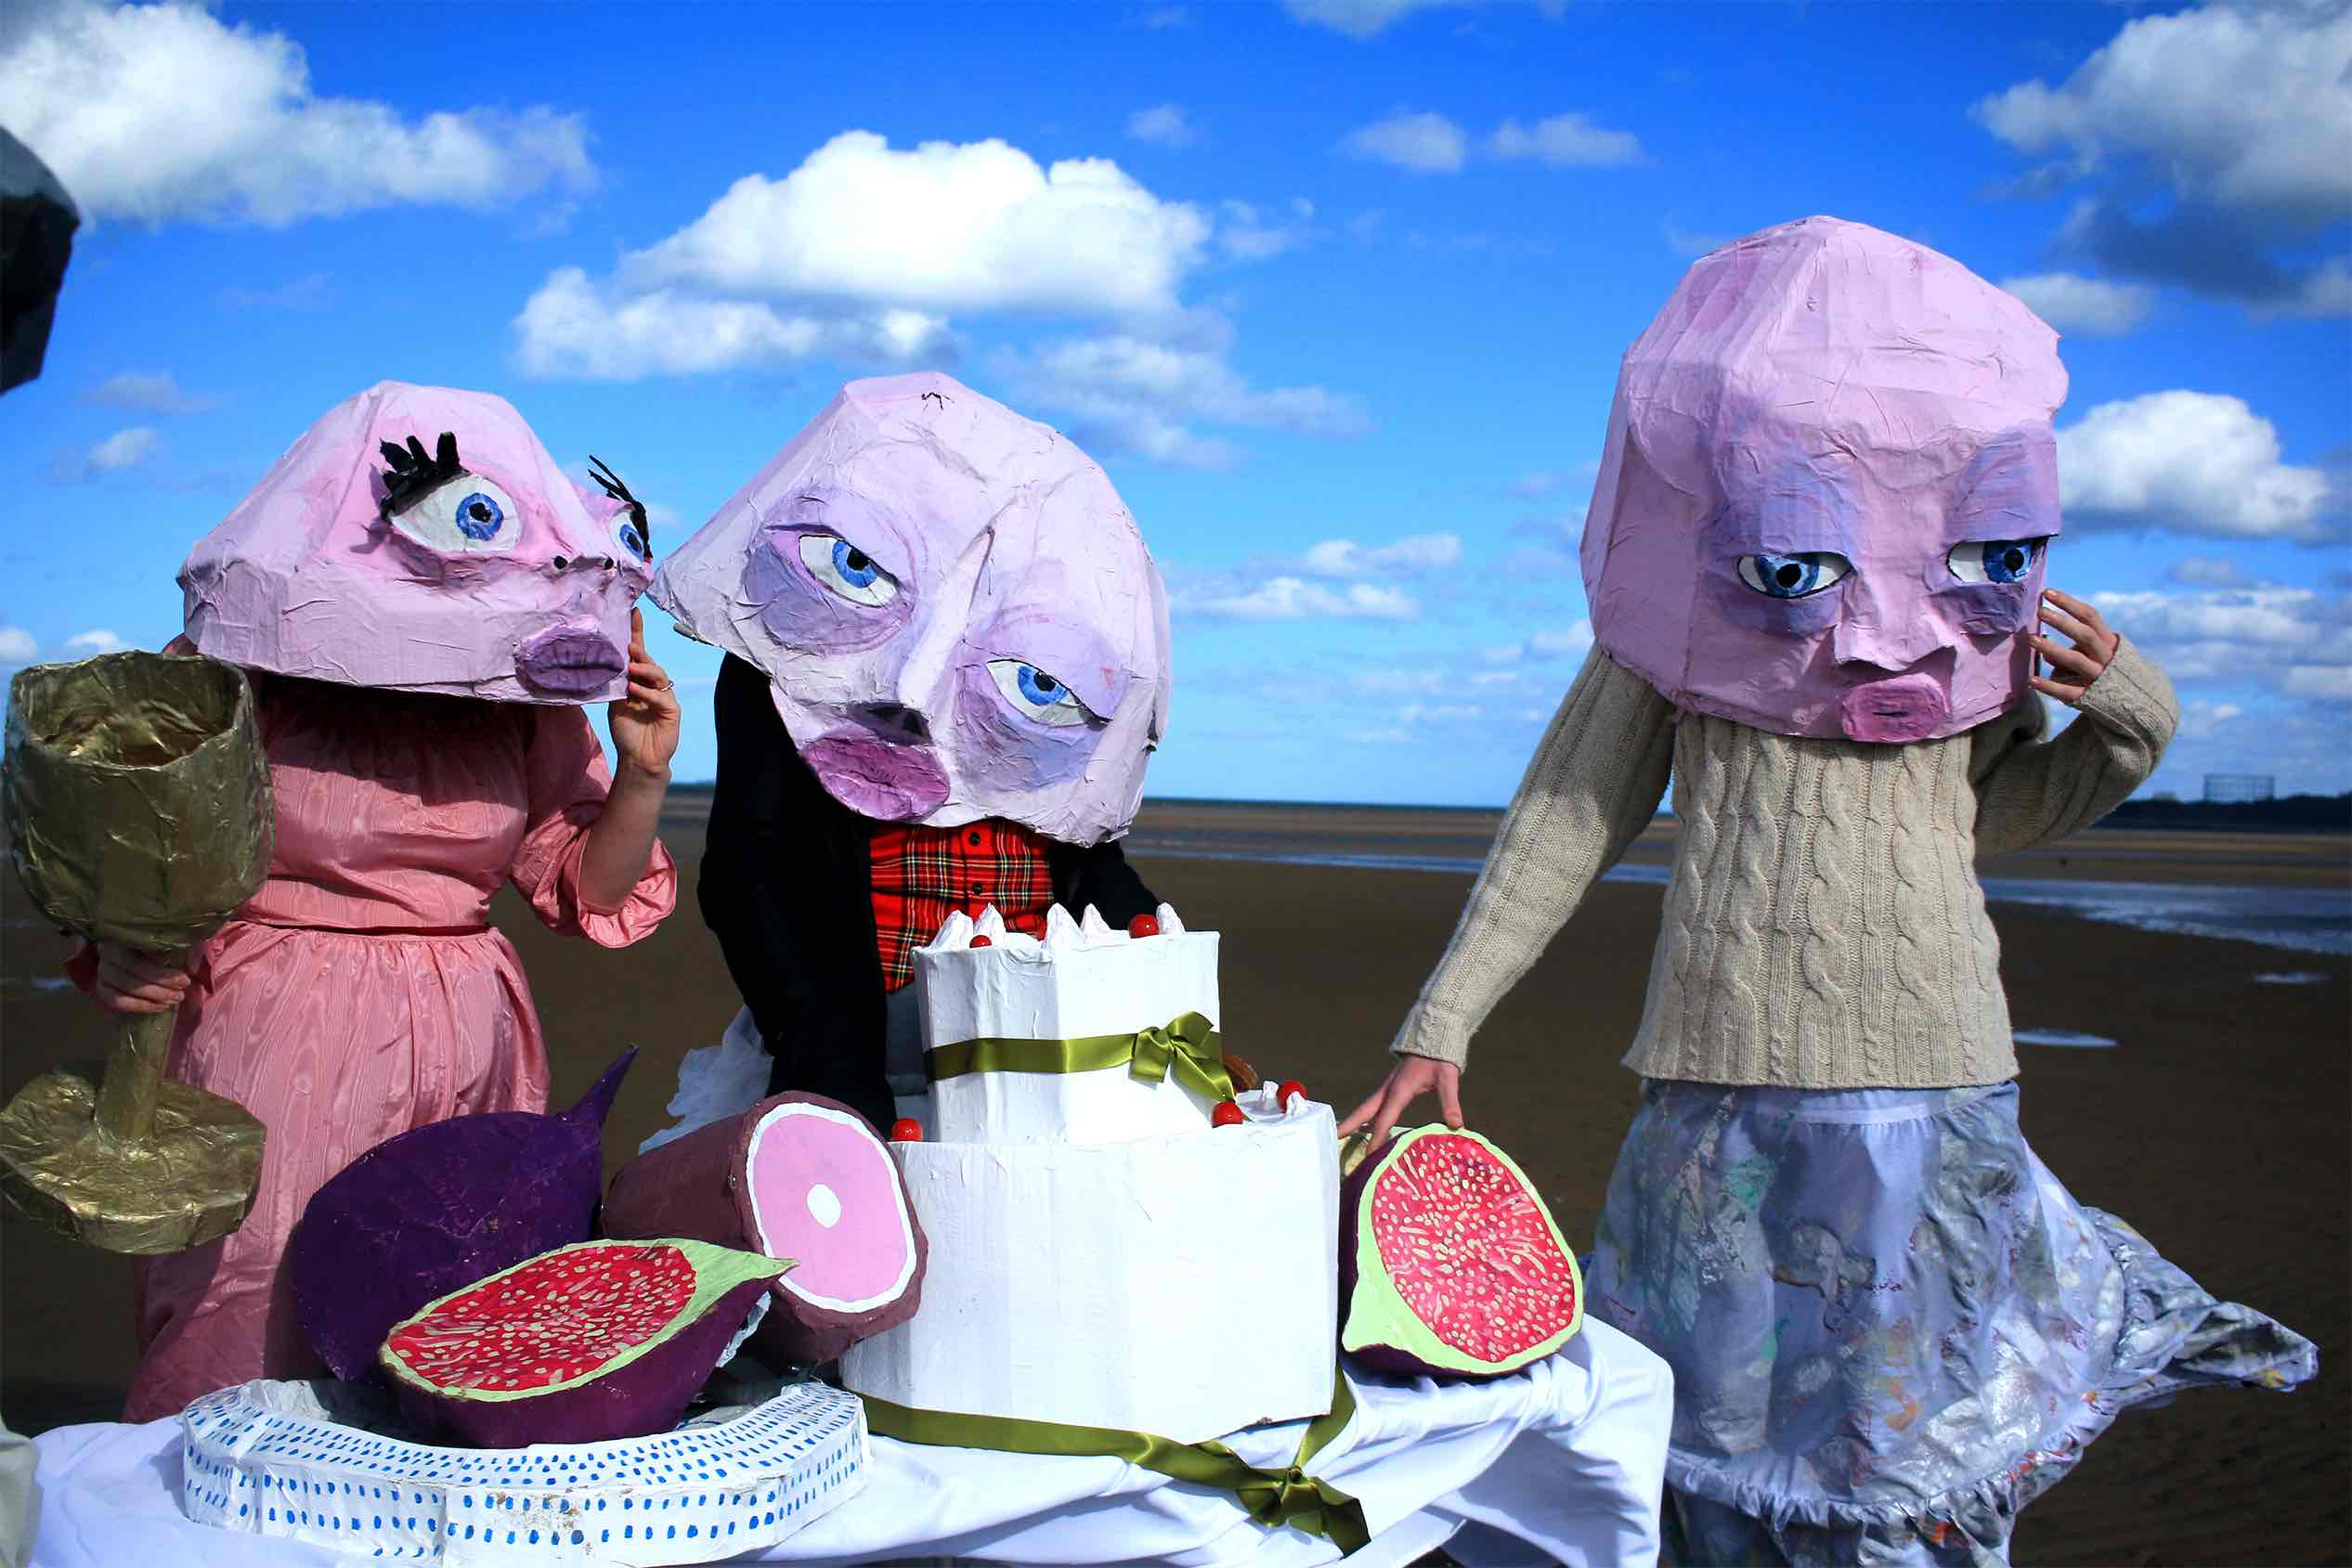 Three figures with pink papier-mâché masks stood around a table of cardboard food on the beach.